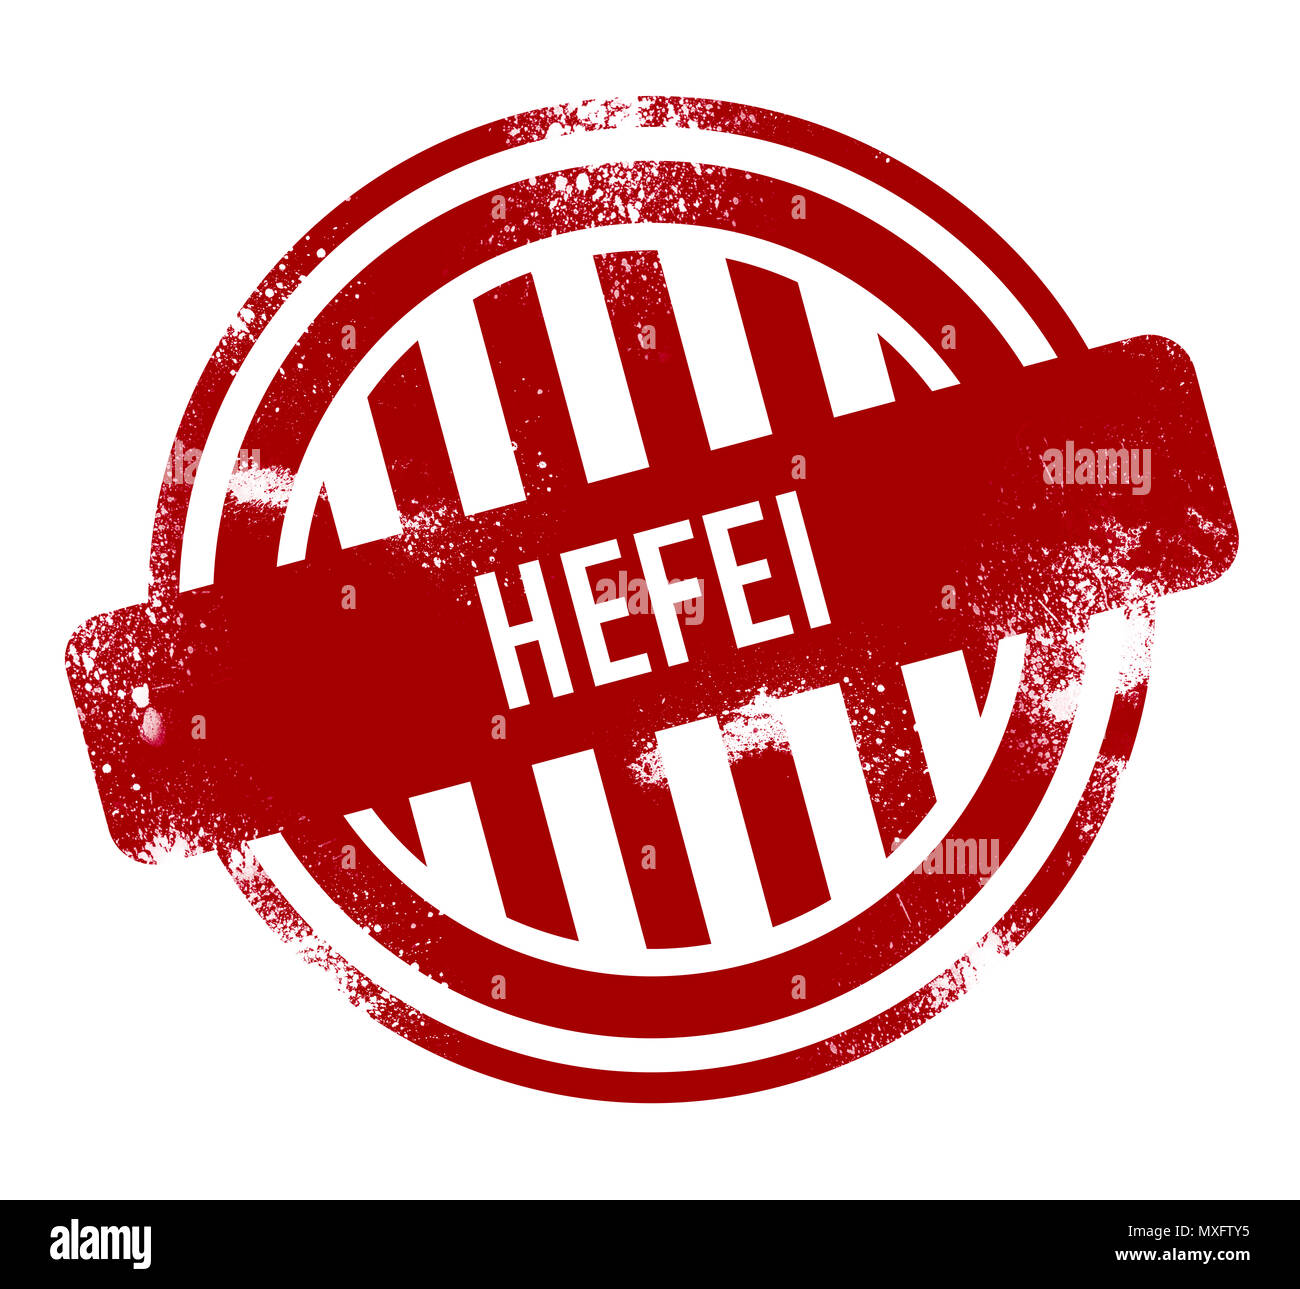 Hefei - Red grunge button, stamp Stock Photo